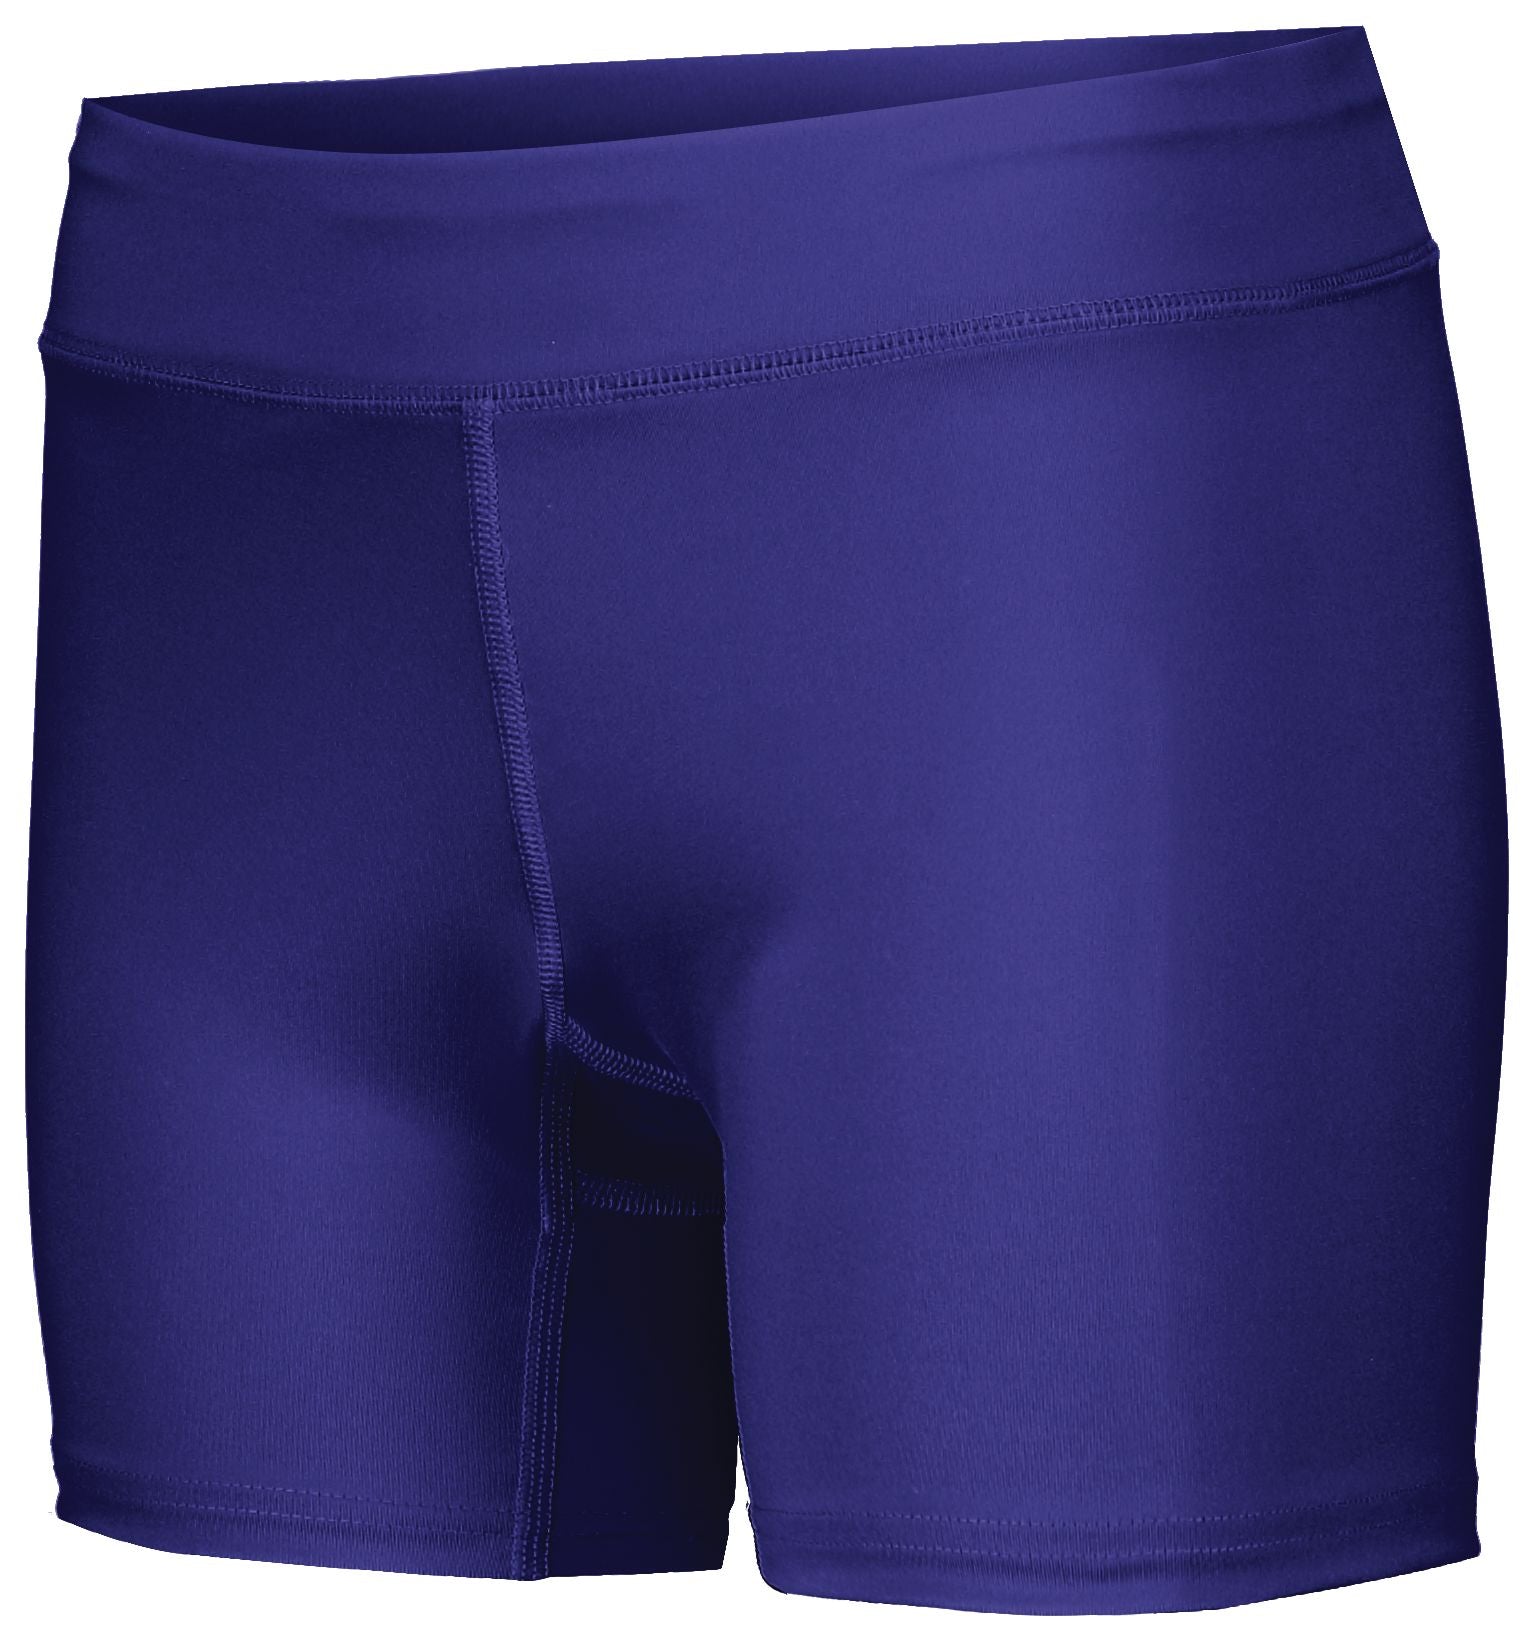 Holloway Ladies Pr Max Compression Shorts in Purple (Hlw)  -Part of the Ladies, Ladies-Shorts, Track-Field, Holloway product lines at KanaleyCreations.com